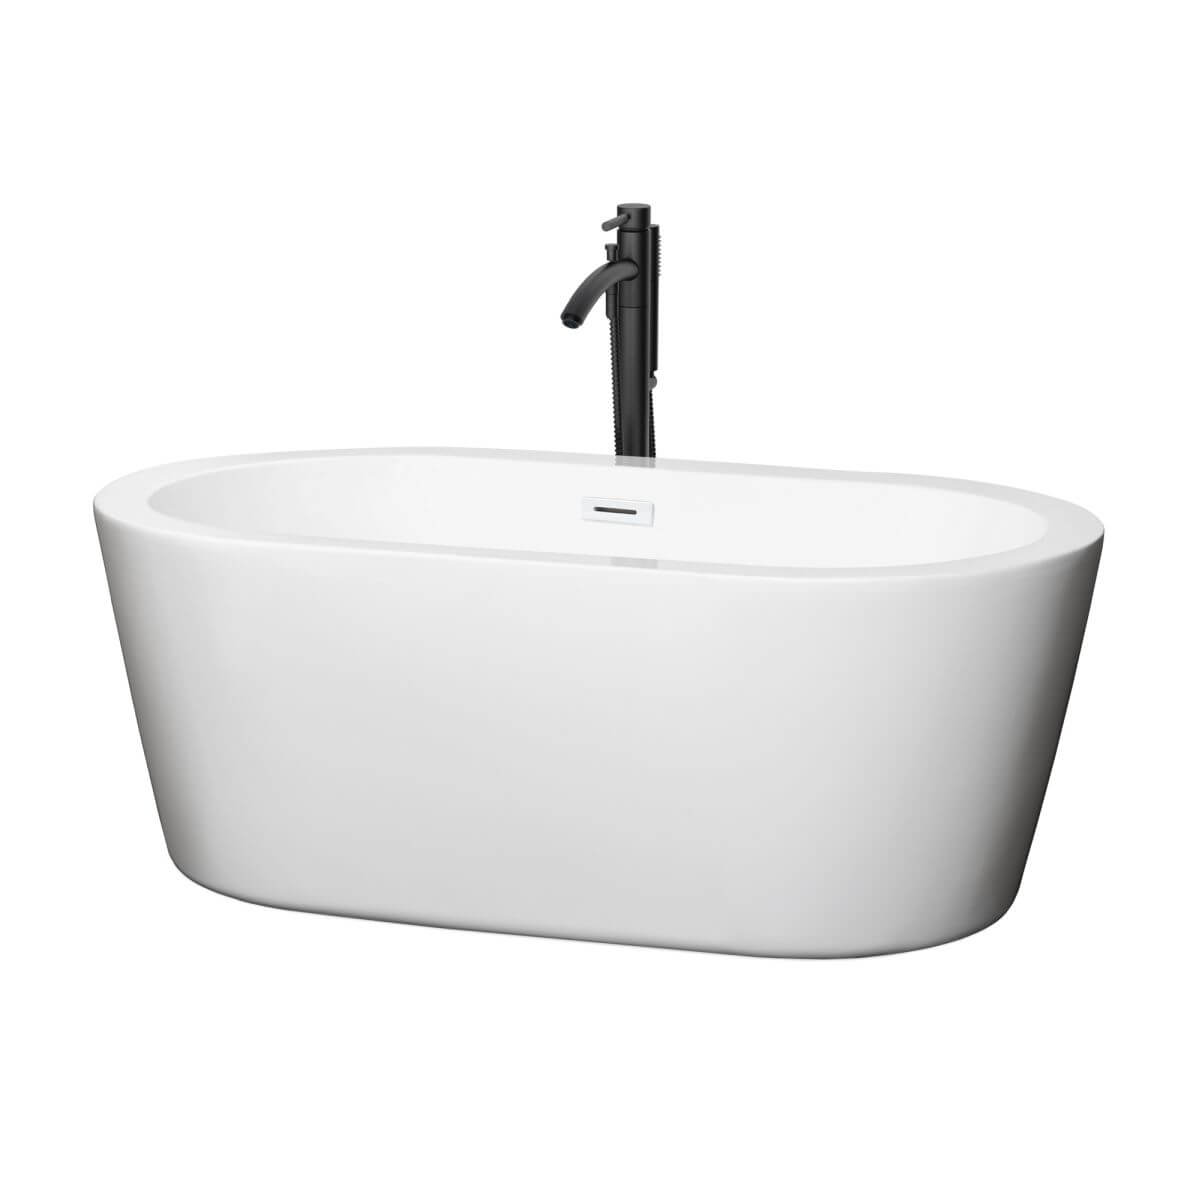 Wyndham Collection Mermaid 60 inch Freestanding Bathtub in White with Shiny White Trim and Floor Mounted Faucet in Matte Black - WCOBT100360SWATPBK